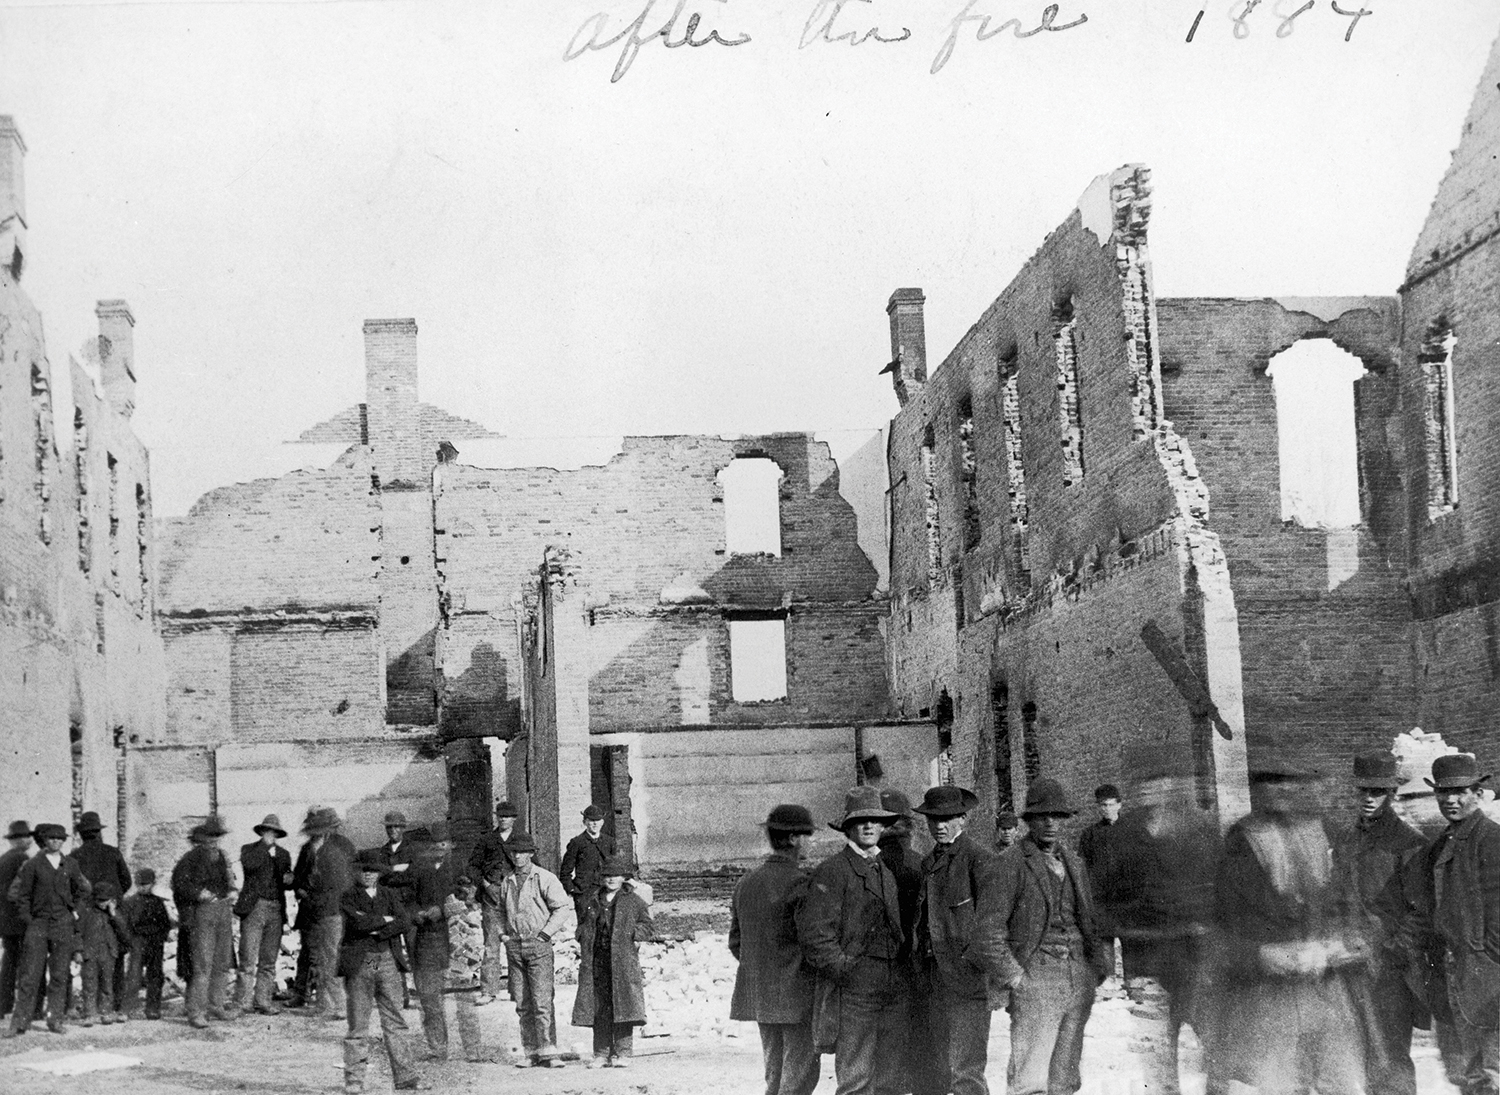 photo of the Lewis Building after an 1884 fire hollowed it out